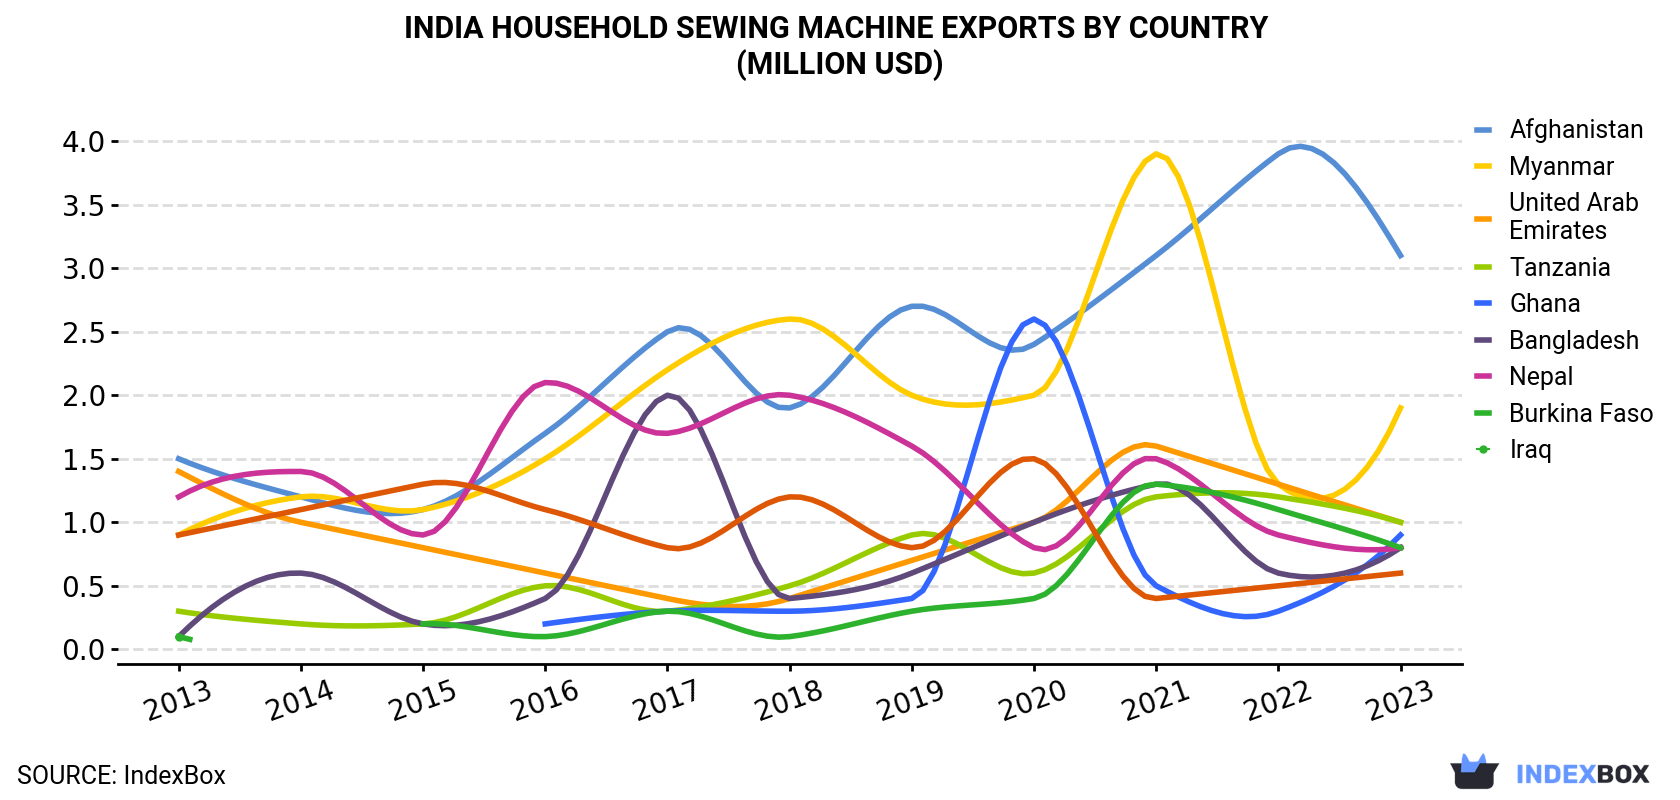 India Household Sewing Machine Exports By Country (Million USD)